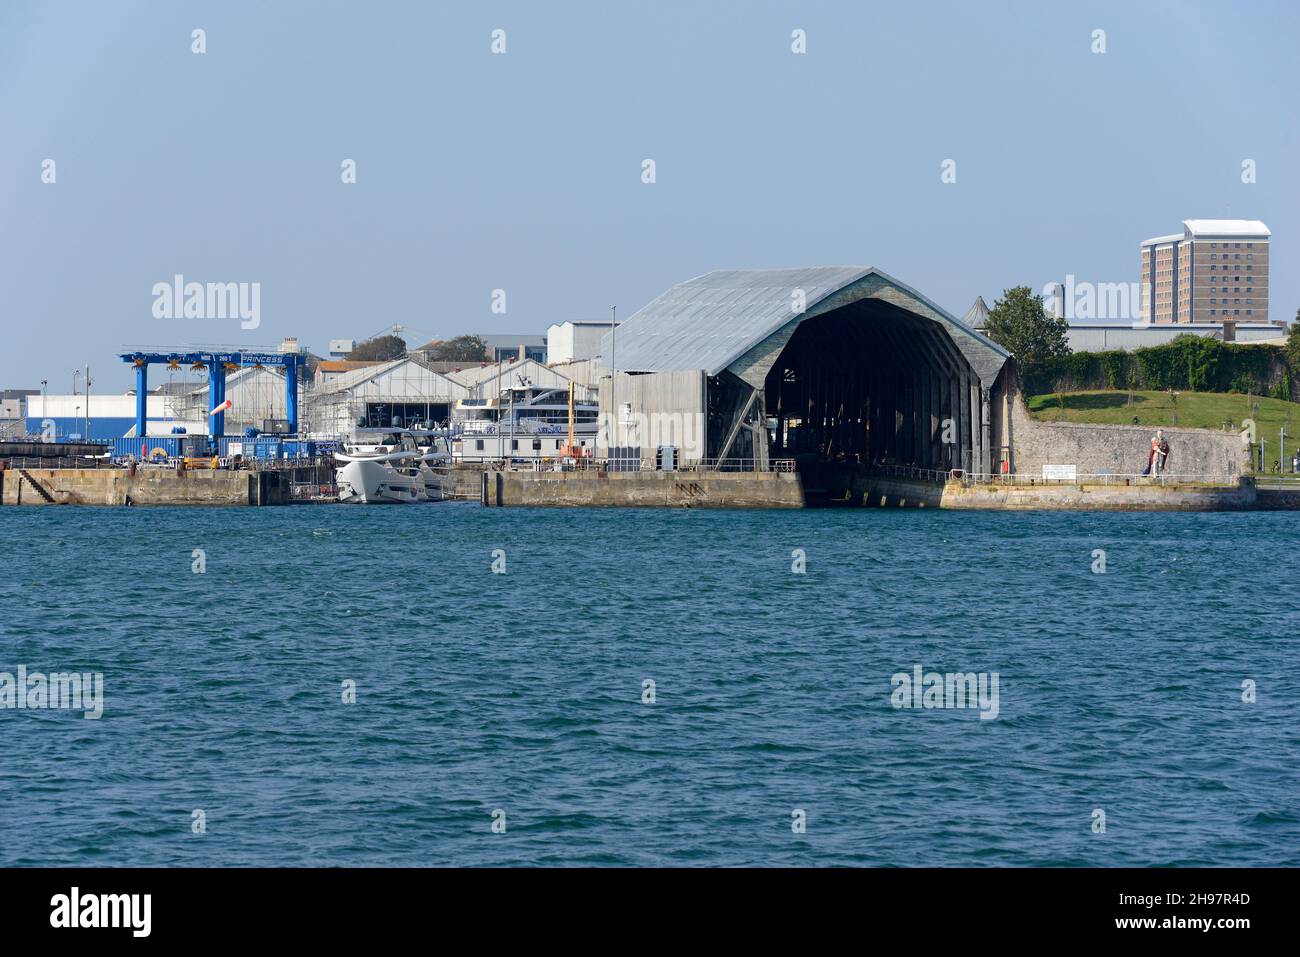 Stirling and Son's boatyard in Plymouth seen from across the water with the King Billy statue visible to the right. Stock Photo